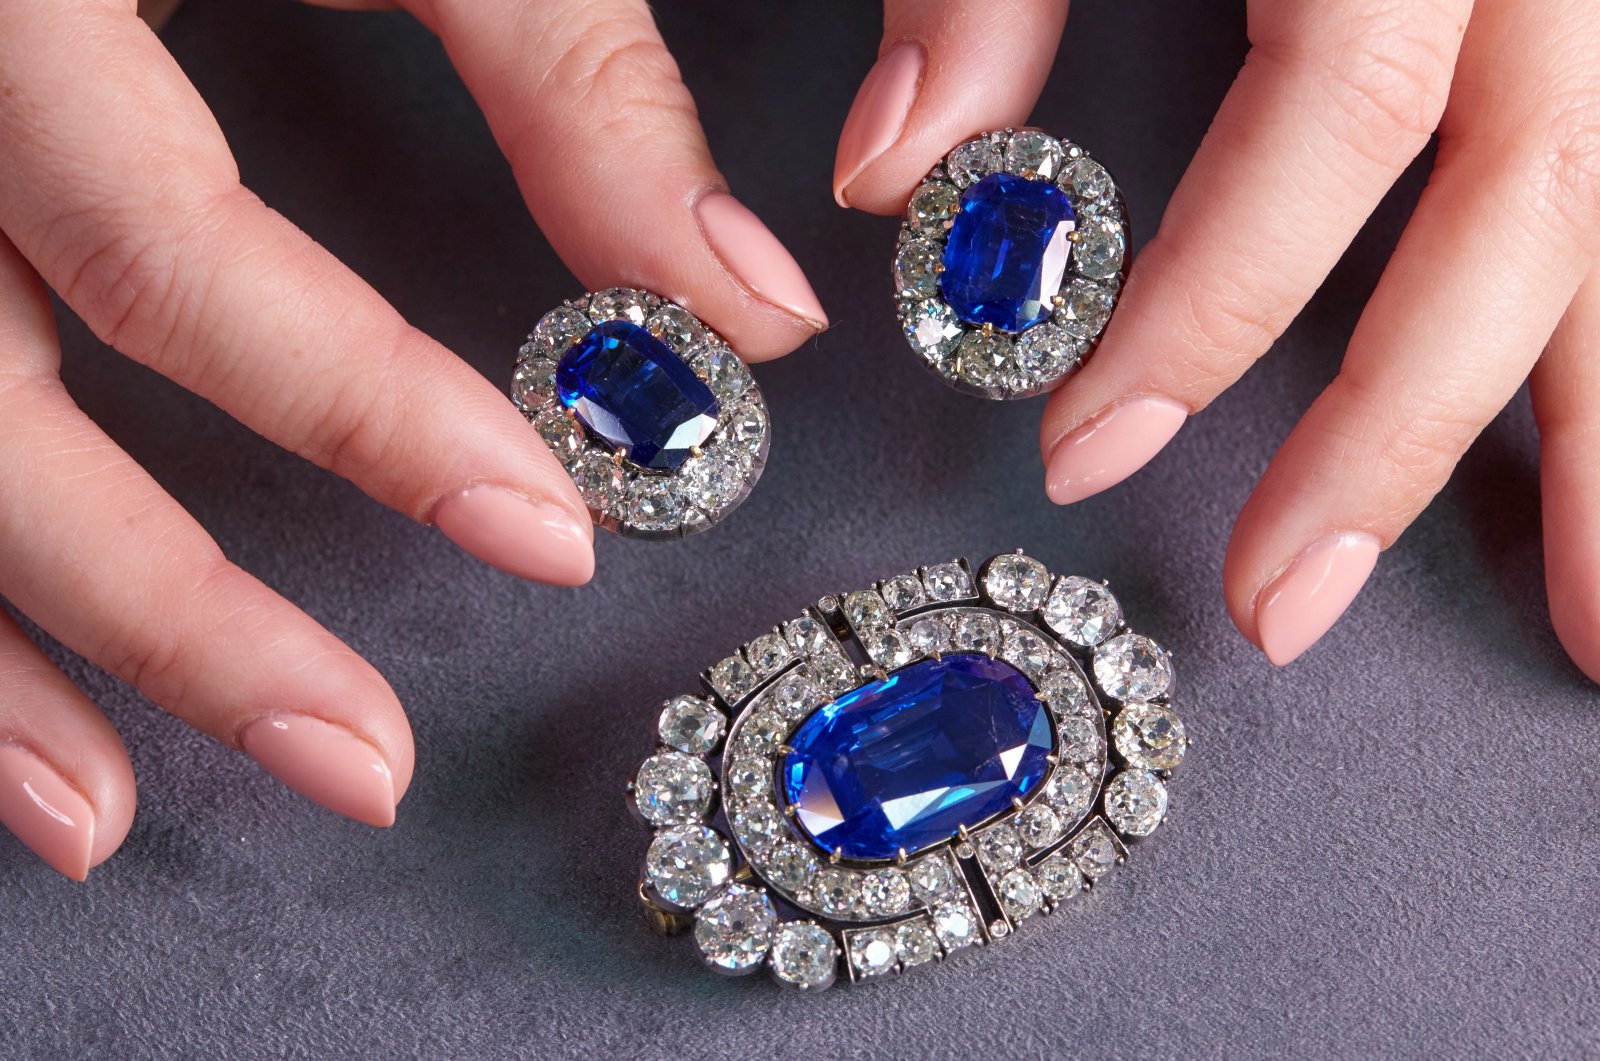 A staff member holds a historically valuable sapphire and diamond brooch and a pair of ear clips during a preview at Sotheby's, before their auction sale in Geneva, Switzerland, Nov. 2, 2021.  (Reuters Photo)